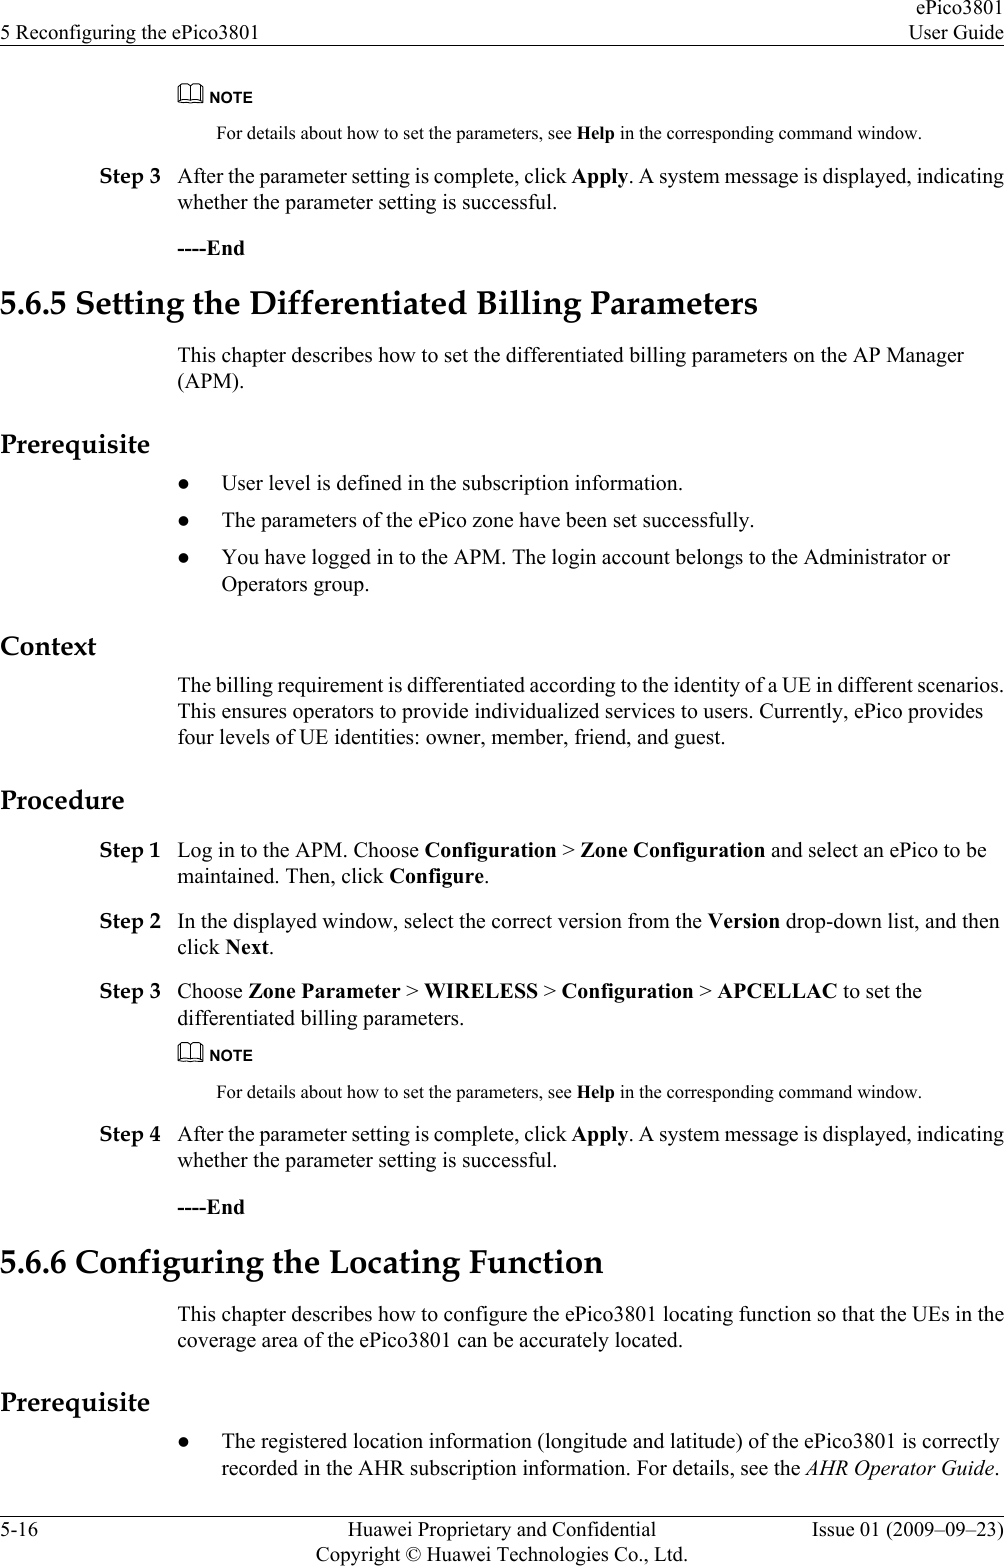 NOTEFor details about how to set the parameters, see Help in the corresponding command window.Step 3 After the parameter setting is complete, click Apply. A system message is displayed, indicatingwhether the parameter setting is successful.----End5.6.5 Setting the Differentiated Billing ParametersThis chapter describes how to set the differentiated billing parameters on the AP Manager(APM).PrerequisitelUser level is defined in the subscription information.lThe parameters of the ePico zone have been set successfully.lYou have logged in to the APM. The login account belongs to the Administrator orOperators group.ContextThe billing requirement is differentiated according to the identity of a UE in different scenarios.This ensures operators to provide individualized services to users. Currently, ePico providesfour levels of UE identities: owner, member, friend, and guest.ProcedureStep 1 Log in to the APM. Choose Configuration &gt; Zone Configuration and select an ePico to bemaintained. Then, click Configure.Step 2 In the displayed window, select the correct version from the Version drop-down list, and thenclick Next.Step 3 Choose Zone Parameter &gt; WIRELESS &gt; Configuration &gt; APCELLAC to set thedifferentiated billing parameters.NOTEFor details about how to set the parameters, see Help in the corresponding command window.Step 4 After the parameter setting is complete, click Apply. A system message is displayed, indicatingwhether the parameter setting is successful.----End5.6.6 Configuring the Locating FunctionThis chapter describes how to configure the ePico3801 locating function so that the UEs in thecoverage area of the ePico3801 can be accurately located.PrerequisitelThe registered location information (longitude and latitude) of the ePico3801 is correctlyrecorded in the AHR subscription information. For details, see the AHR Operator Guide.5 Reconfiguring the ePico3801ePico3801User Guide5-16 Huawei Proprietary and ConfidentialCopyright © Huawei Technologies Co., Ltd.Issue 01 (2009–09–23)